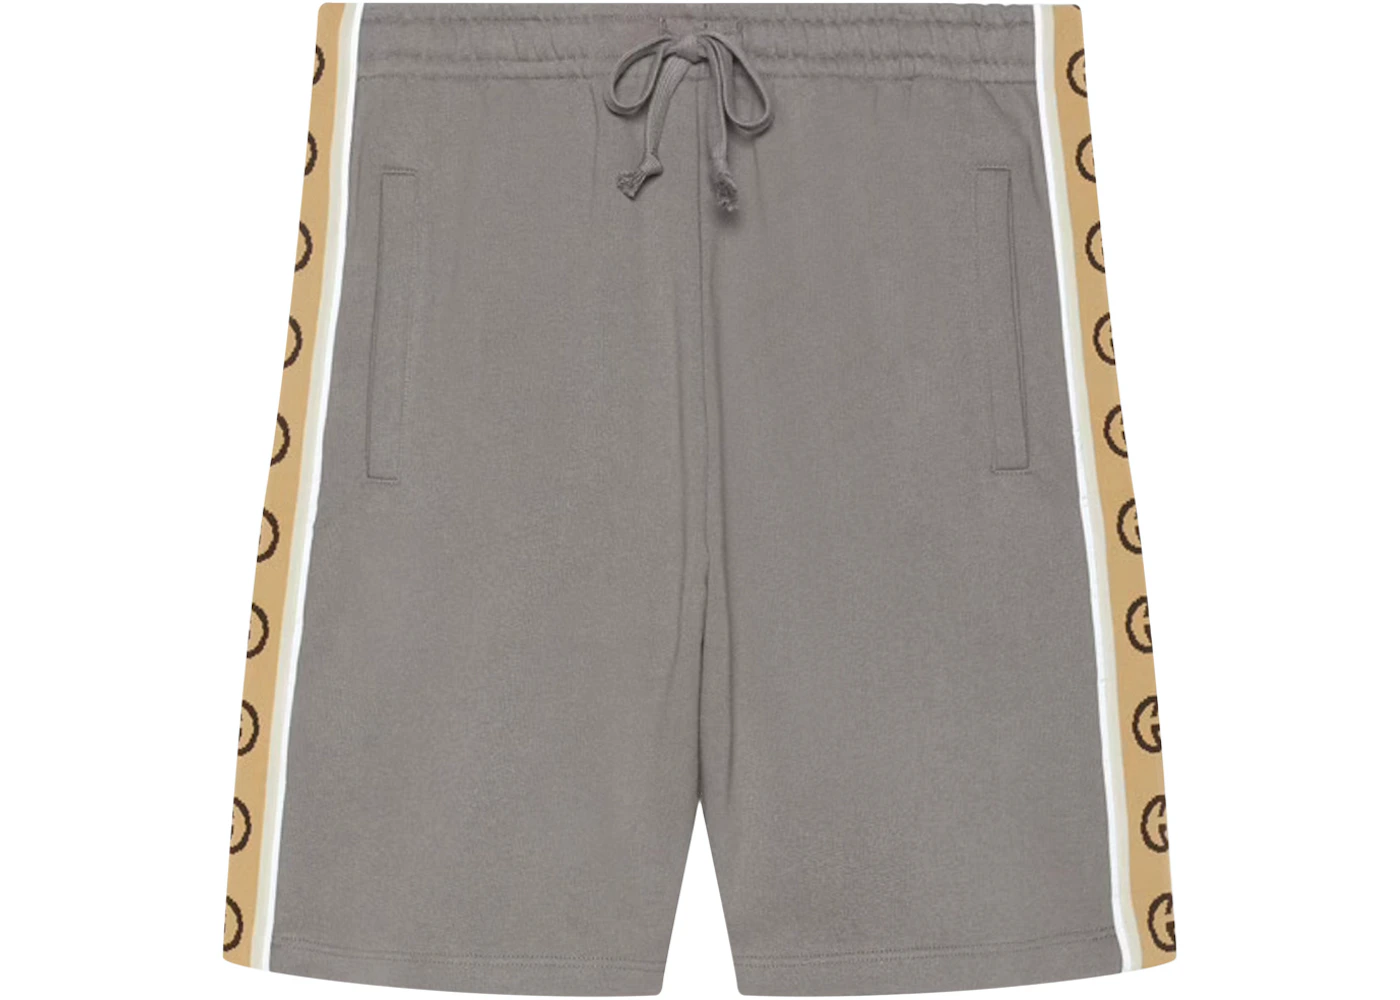 Gucci Cotton Jersey Shorts Grey Men's - GB